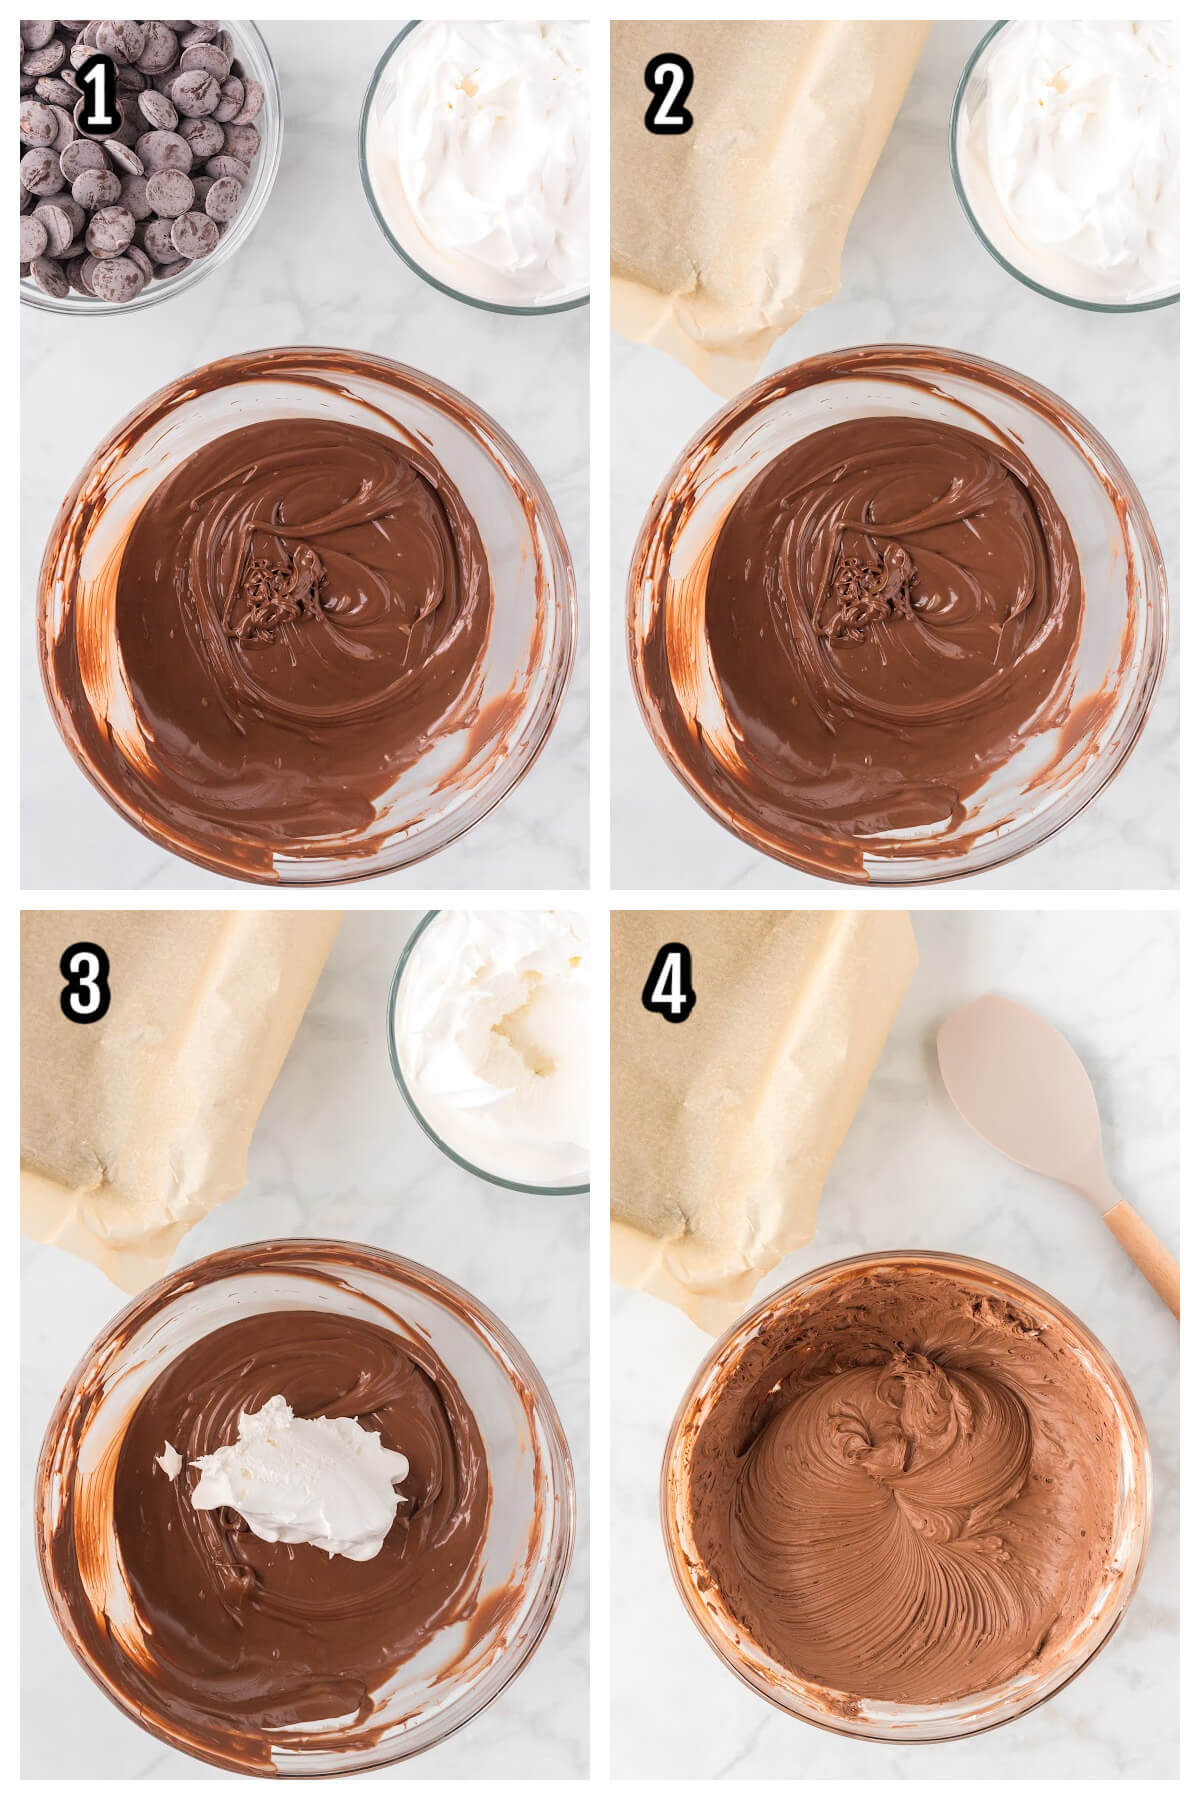 Collage of first four steps to making the Chocolate truffle candy. 